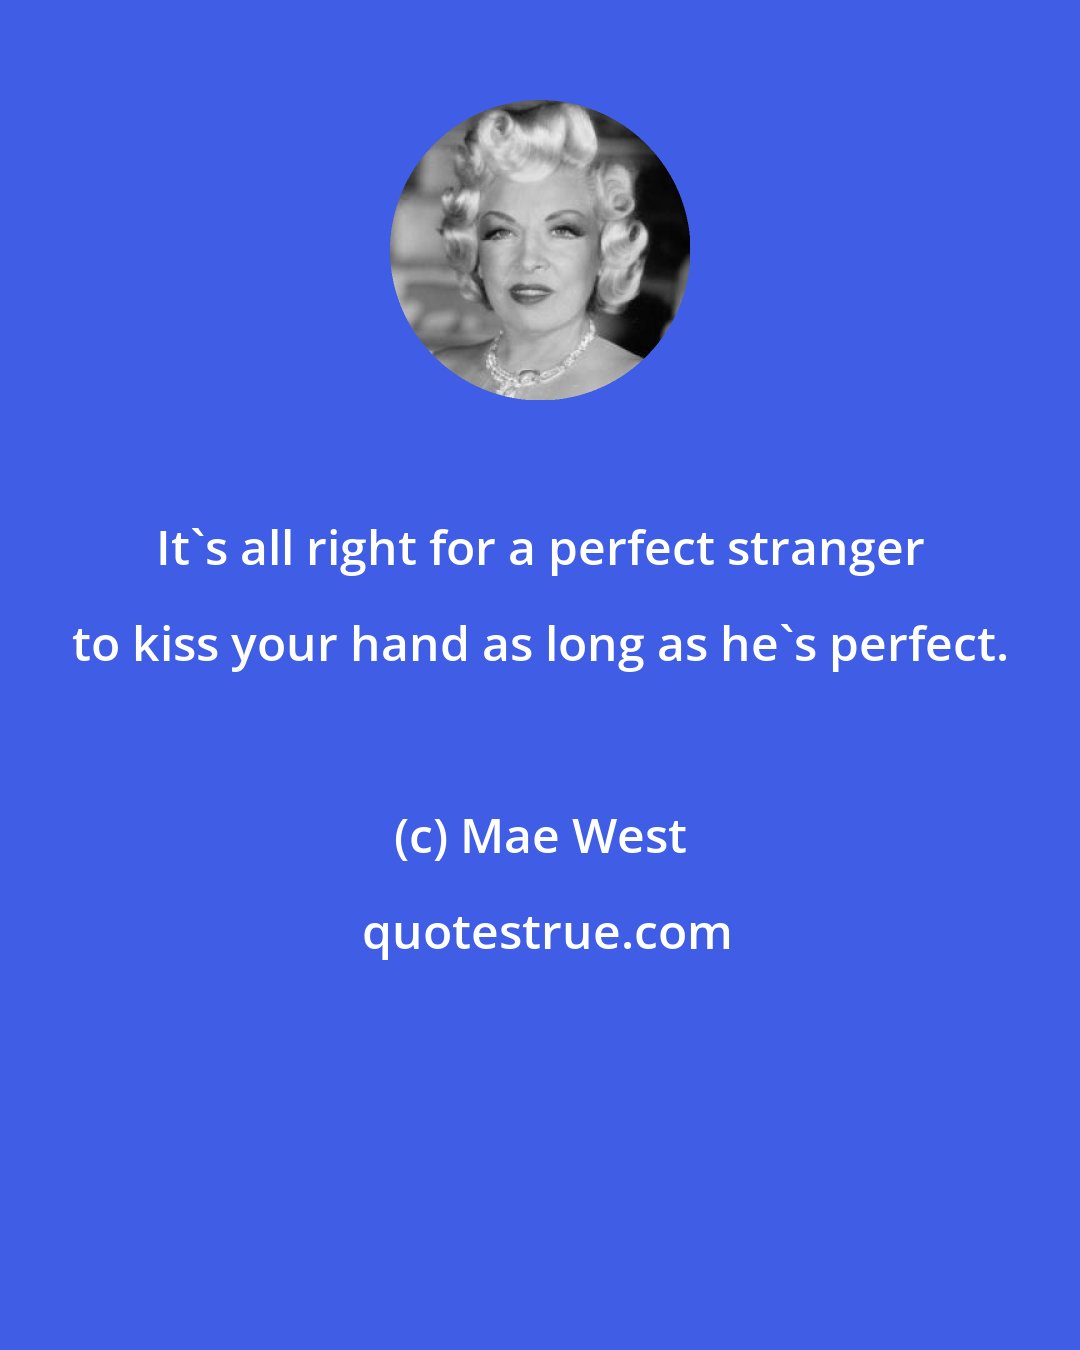 Mae West: It's all right for a perfect stranger to kiss your hand as long as he's perfect.